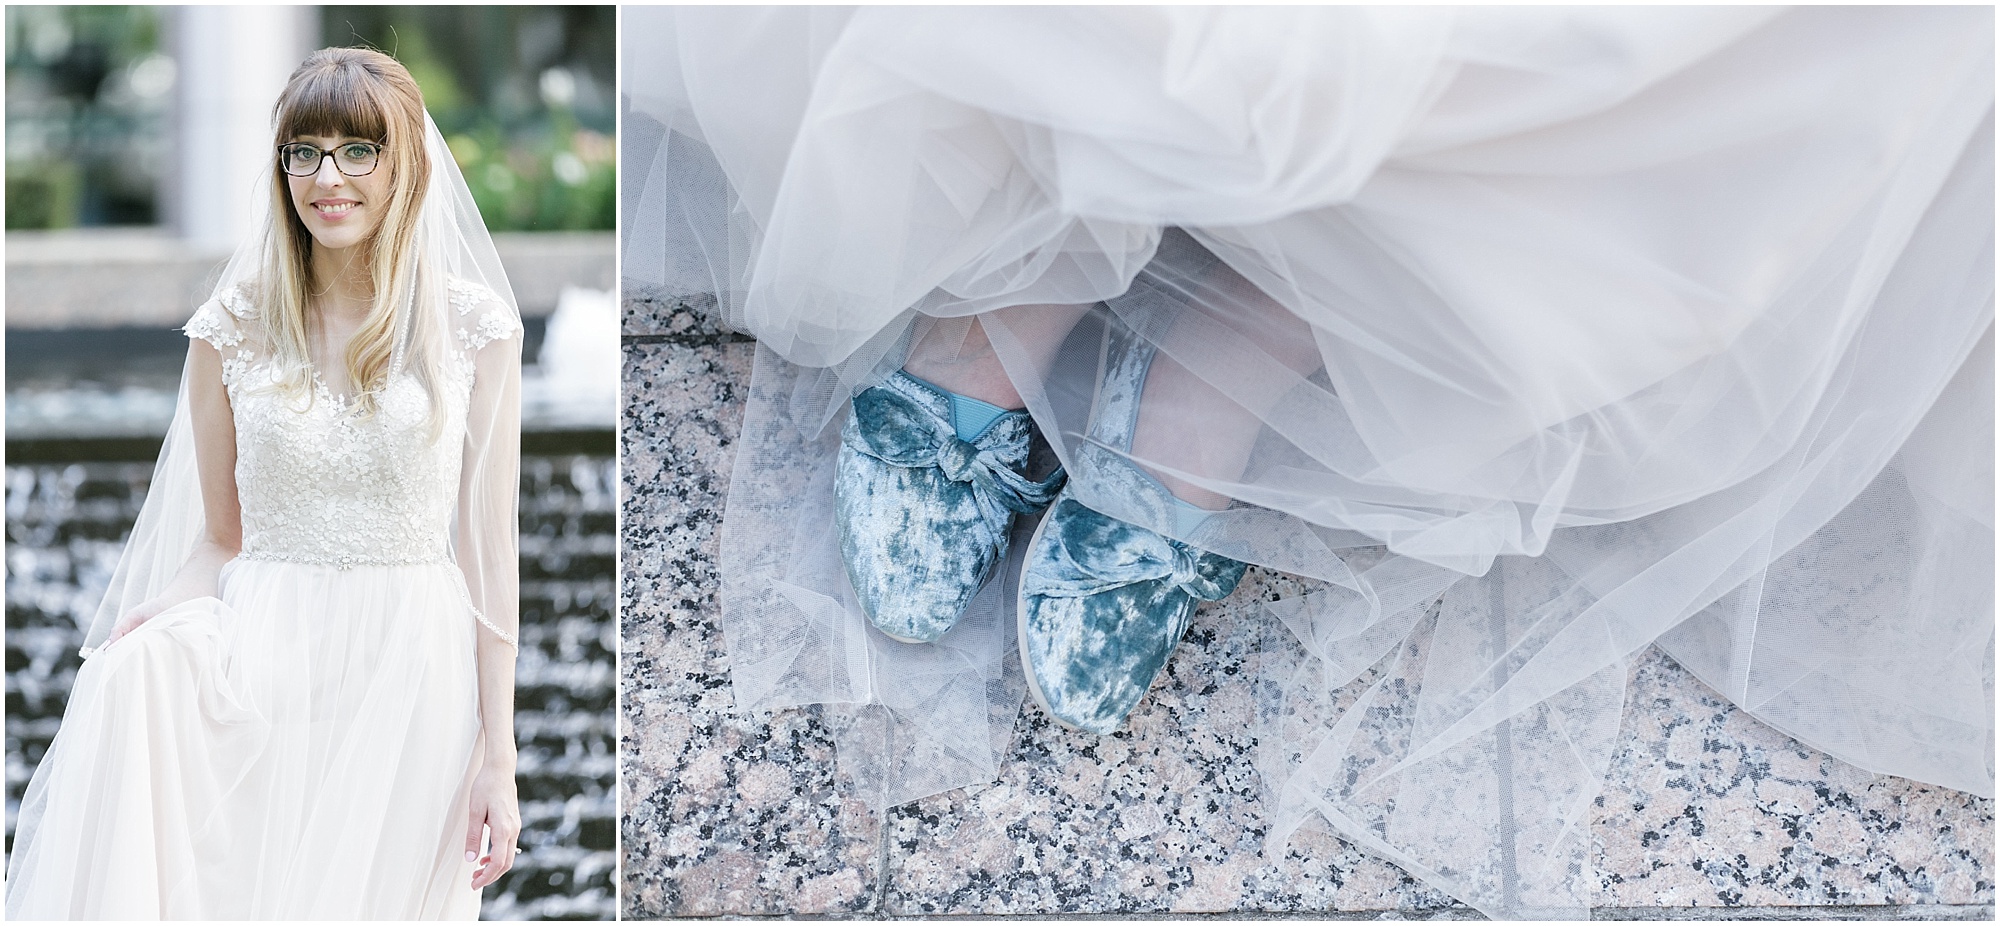 Portrait of the bride and her shoes in downtown Orlando.